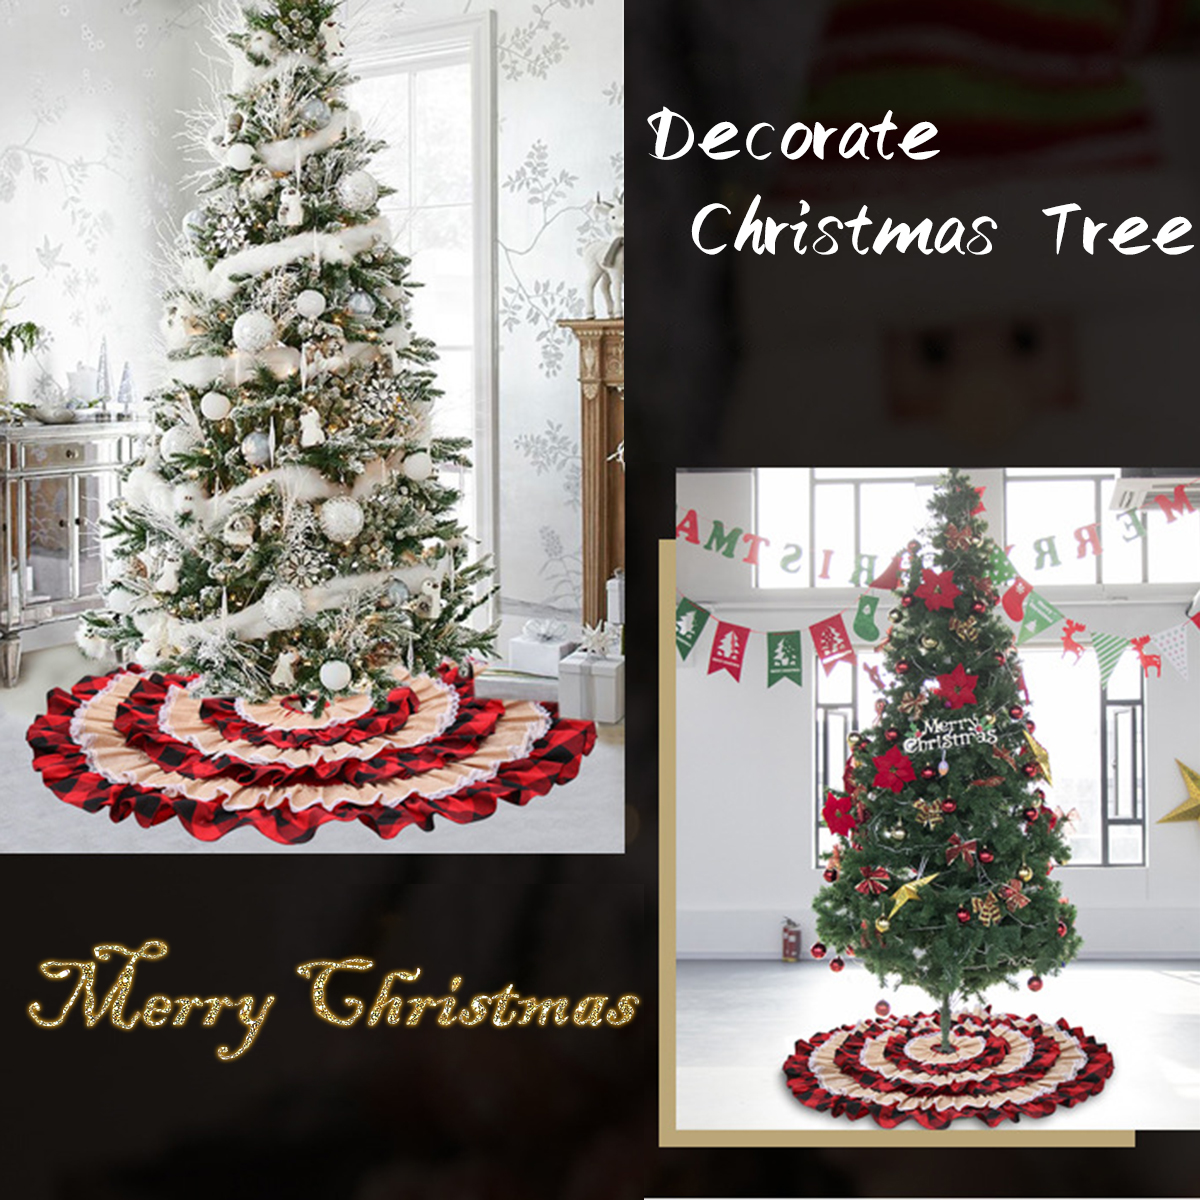 2020-Christmas-Tree-Skirts-Red-Cake-Plaid-Lace-Carpet-Round-Linen-Apron-New-Year-Blanket-Home-Partie-1770964-5